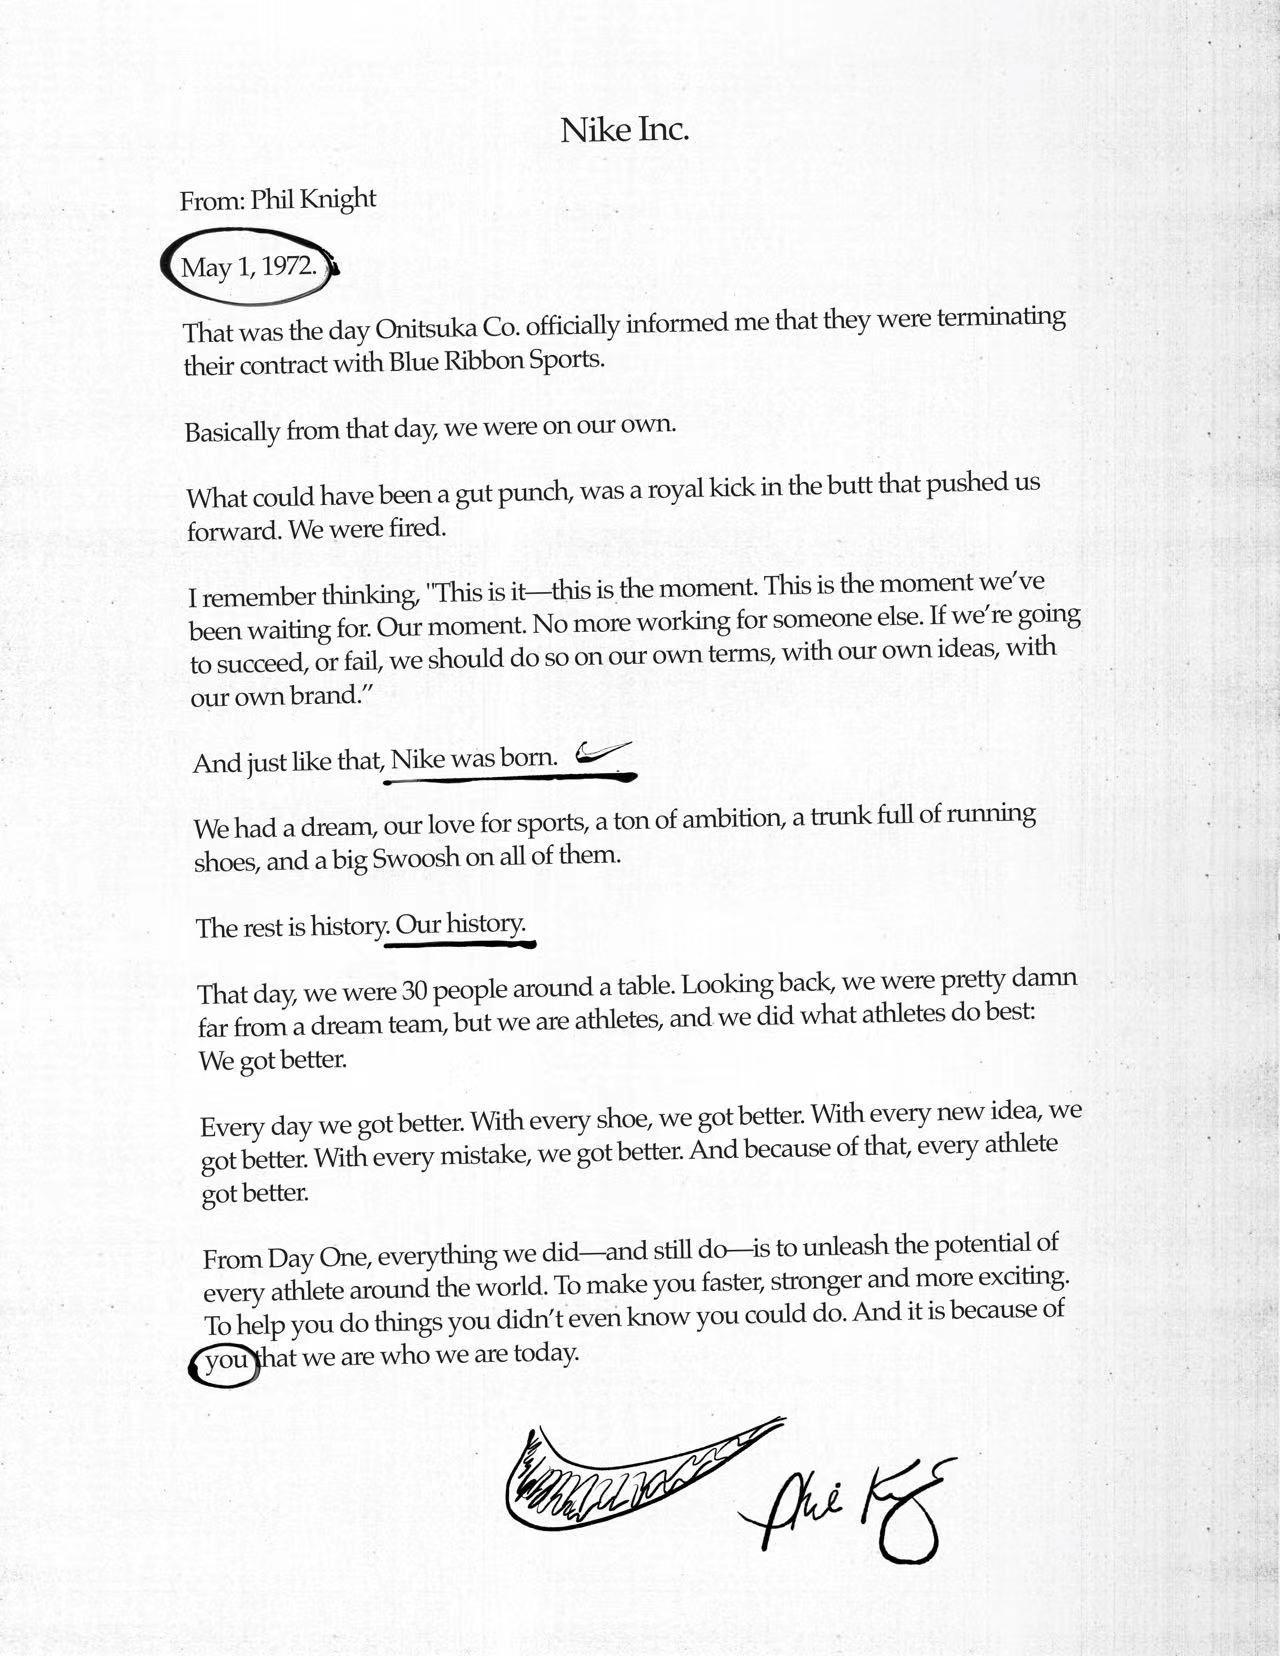 50-years-of-nike-a-letter-from-phil-knight.jpg